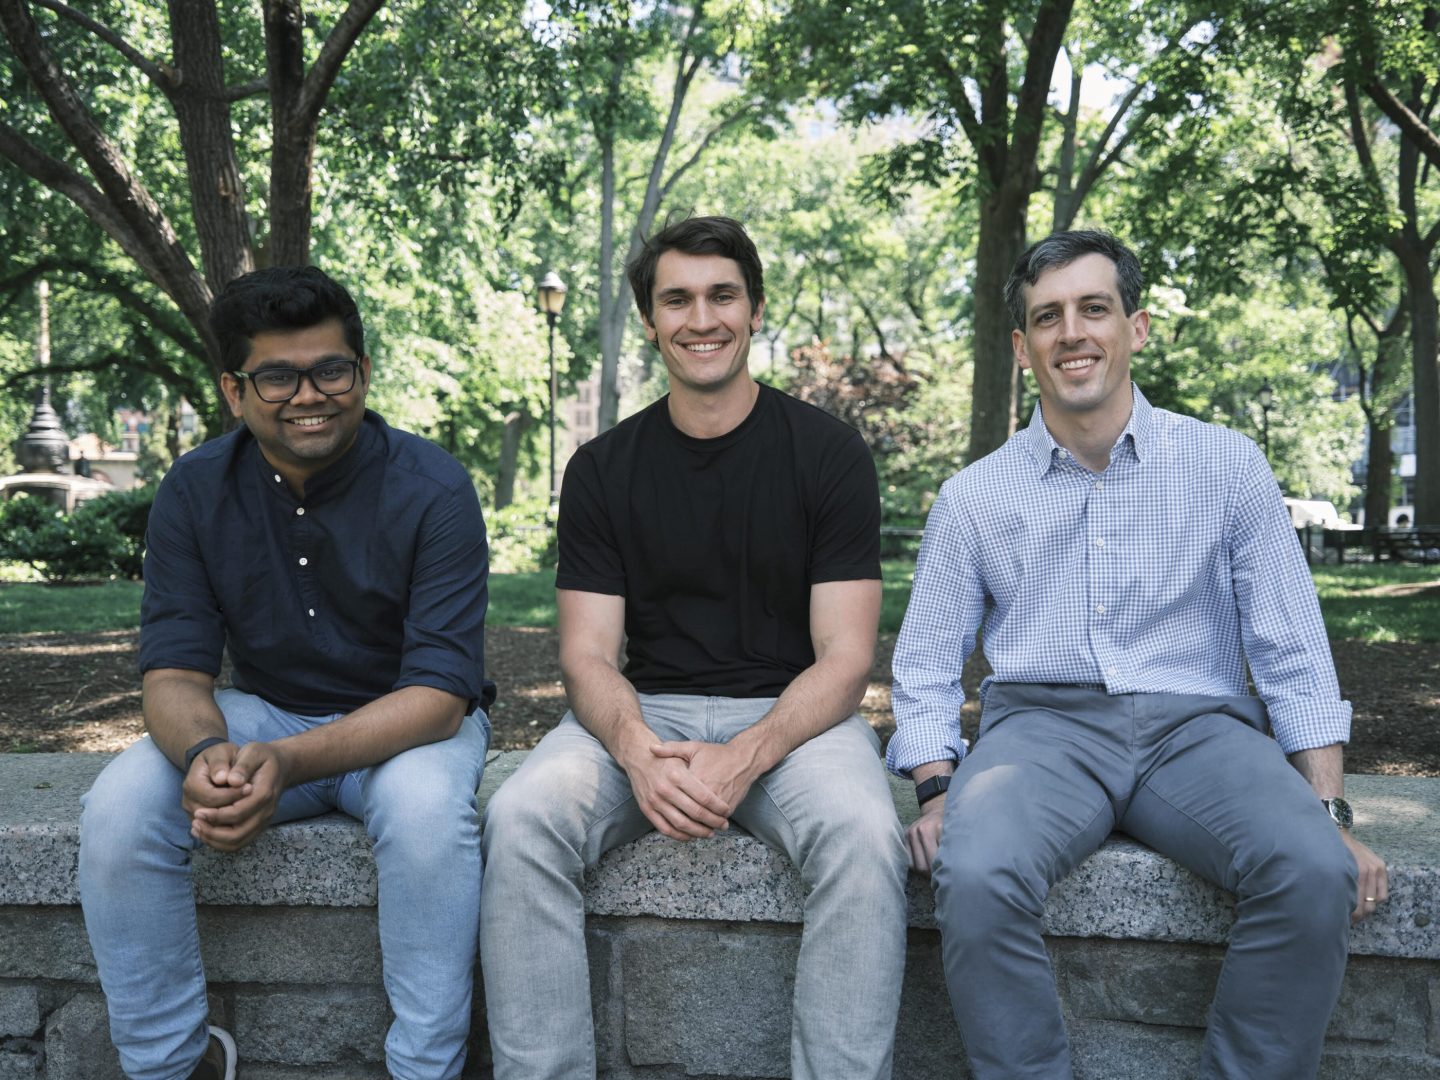 The team at Authentic, from left: Saravana Kumar, head of engineering; Cole Riccardi, CEO; and Zeke Scherl, head of product.